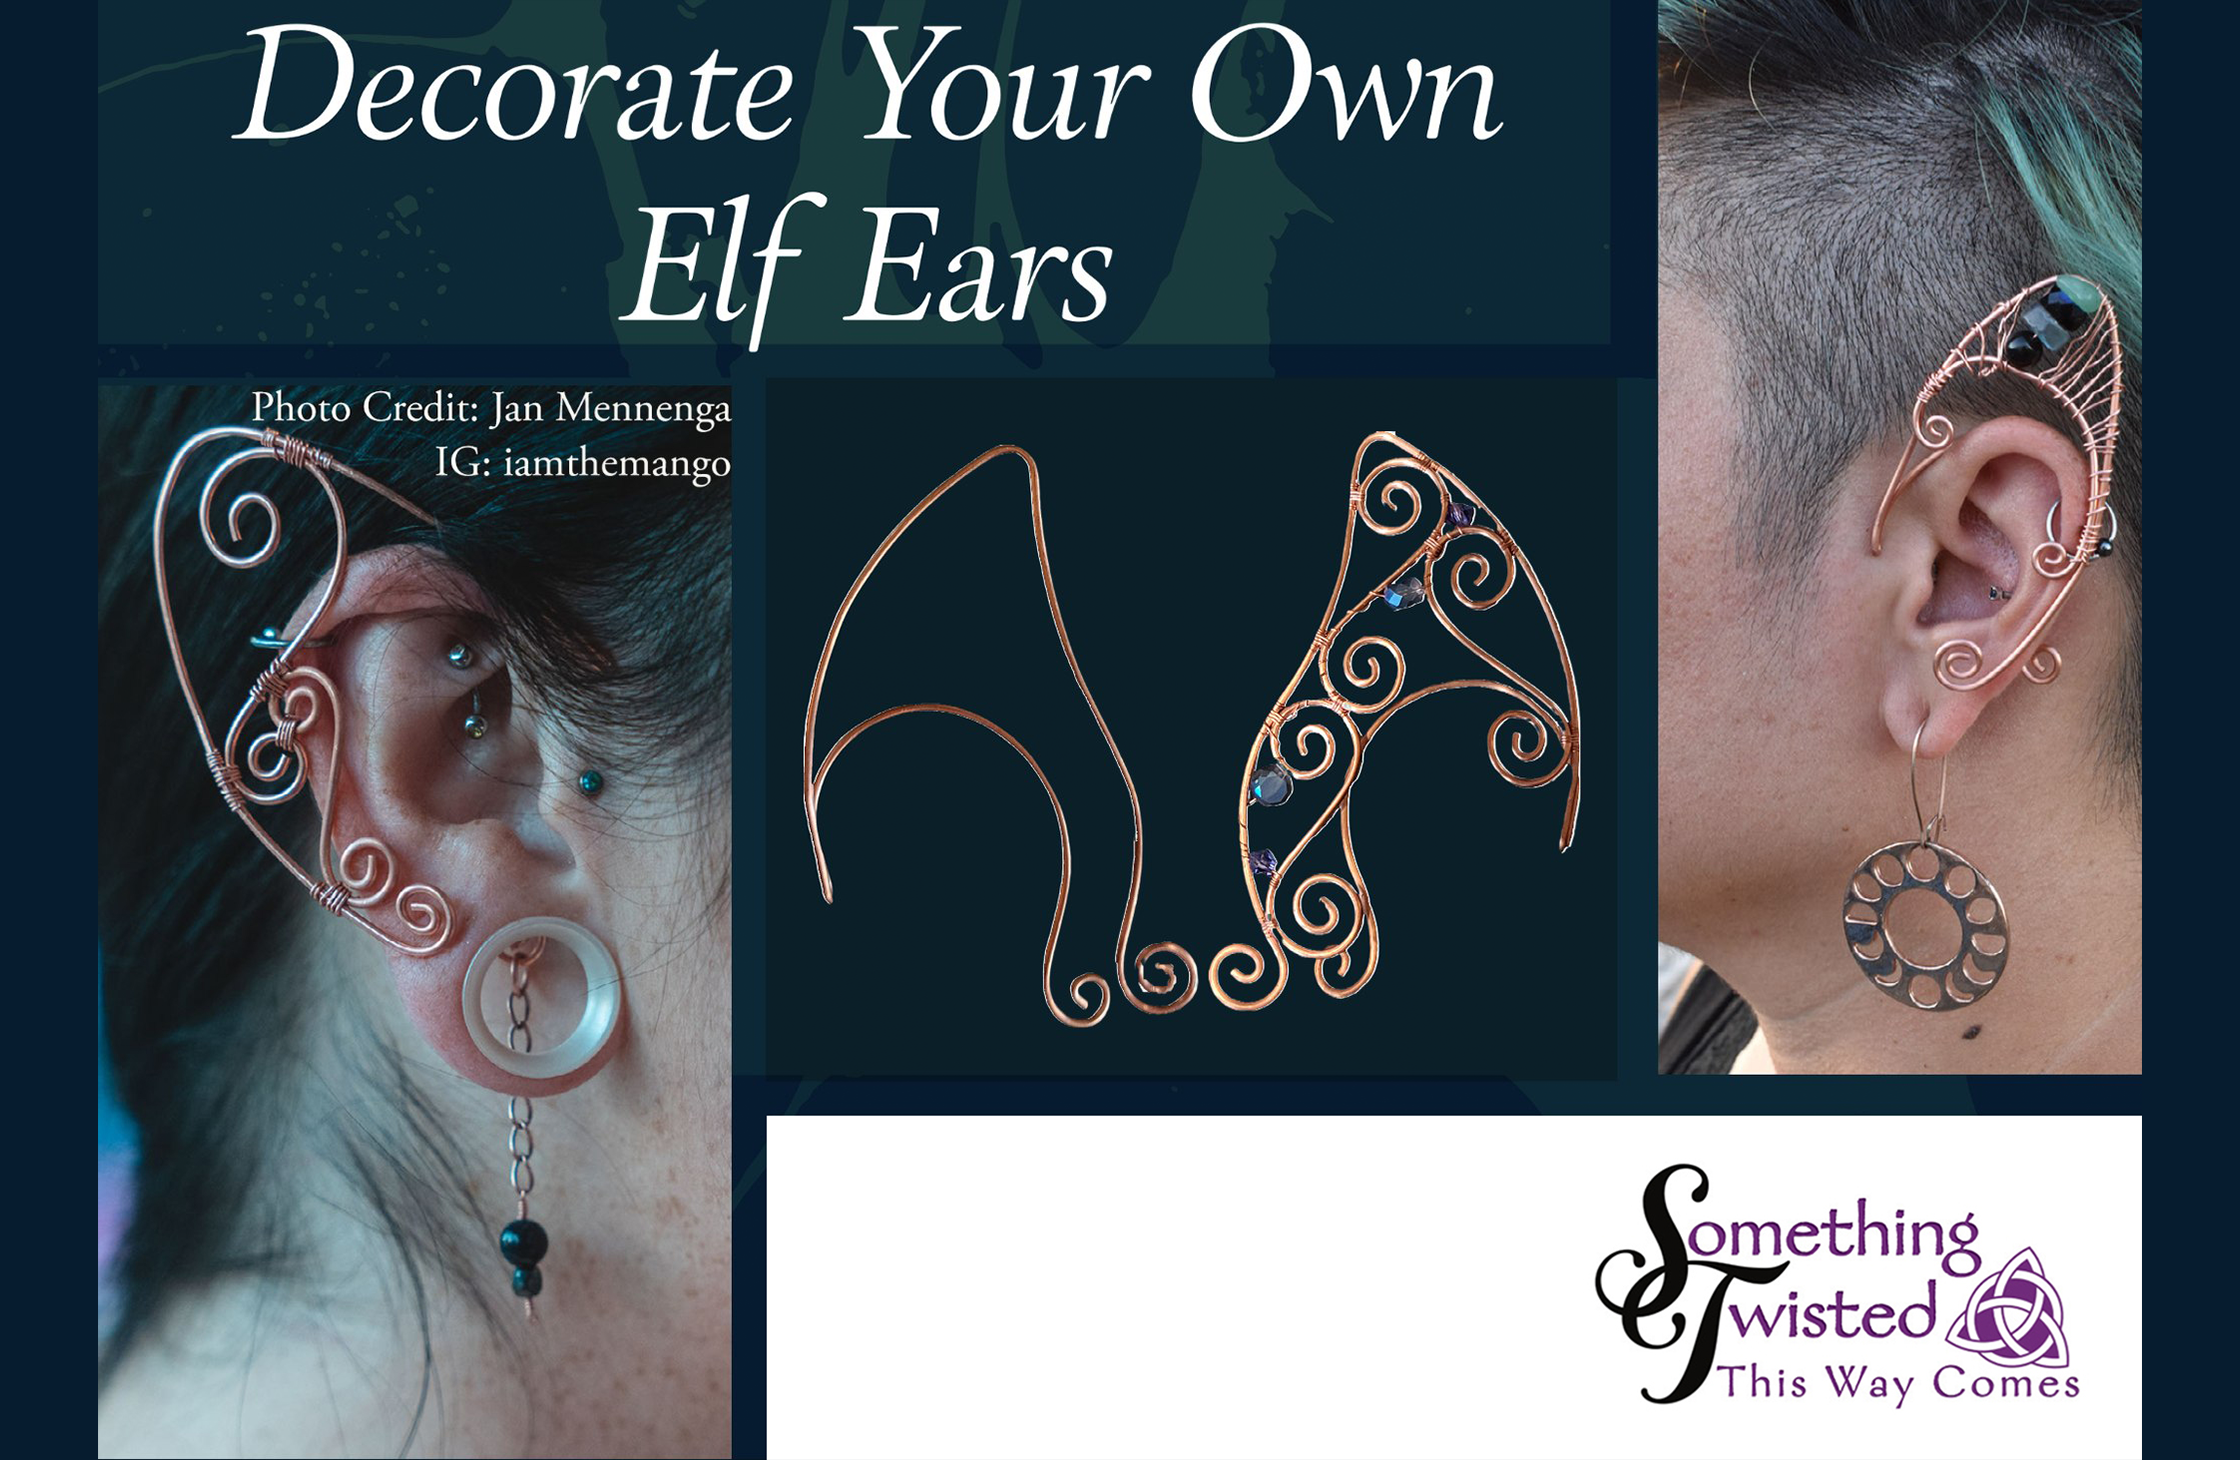 We made elf ears with Something Twisted!